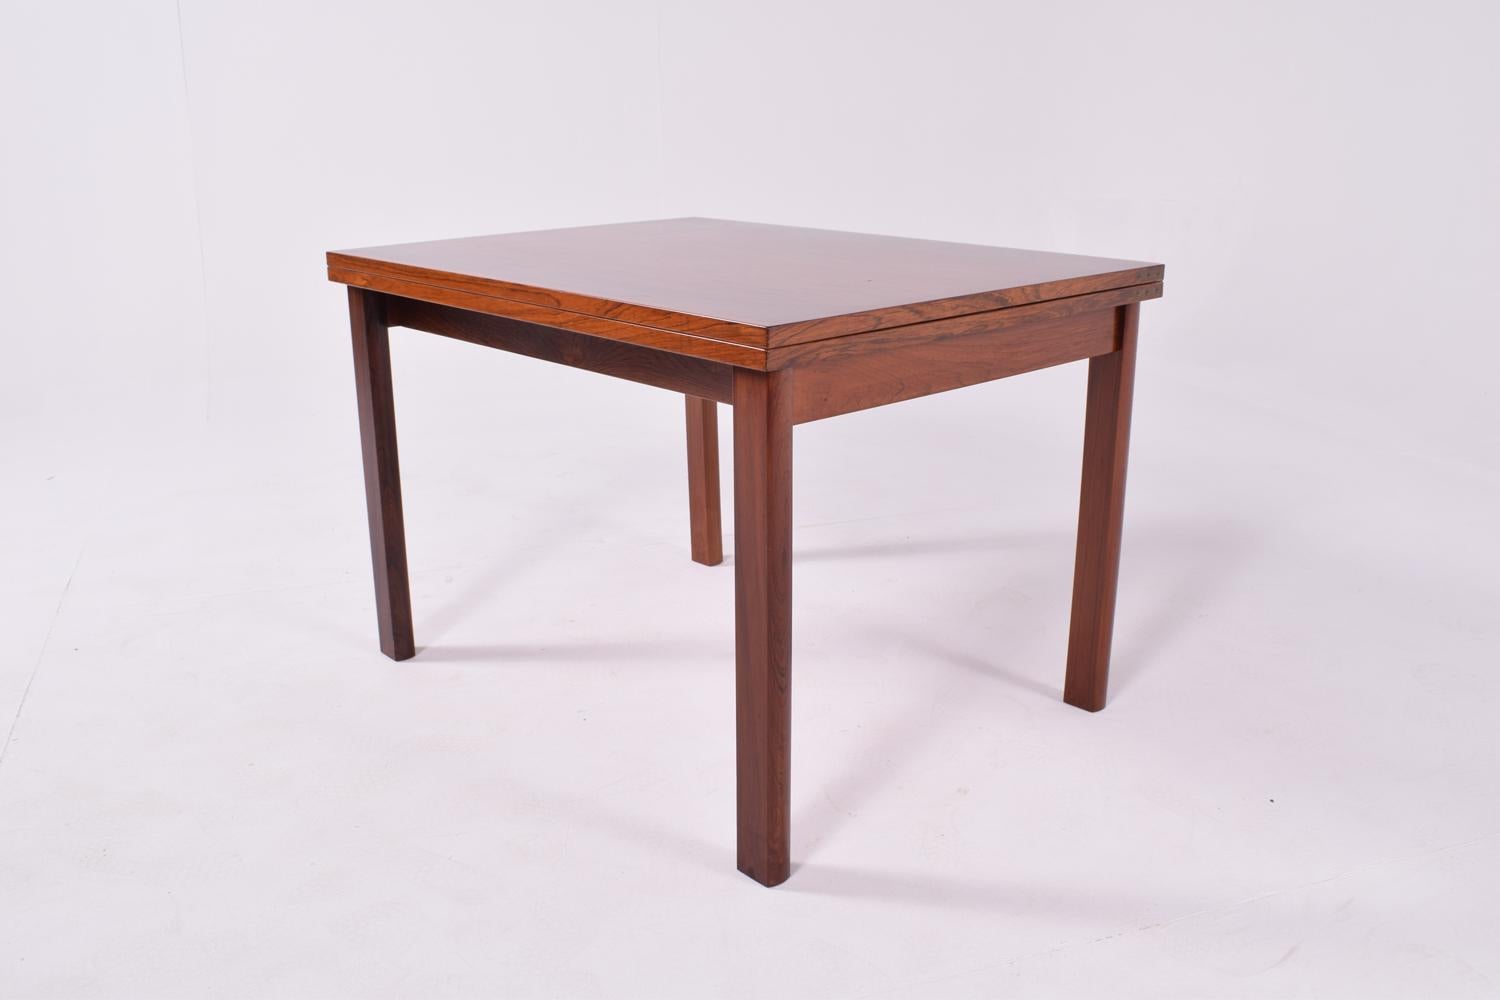 This flip-top coffee table is a masterclass in mid-century design, boasting a solid rosewood frame that exudes natural elegance and durability. The top of the table features meticulously placed rosewood veneers, displaying a beautiful grain that is